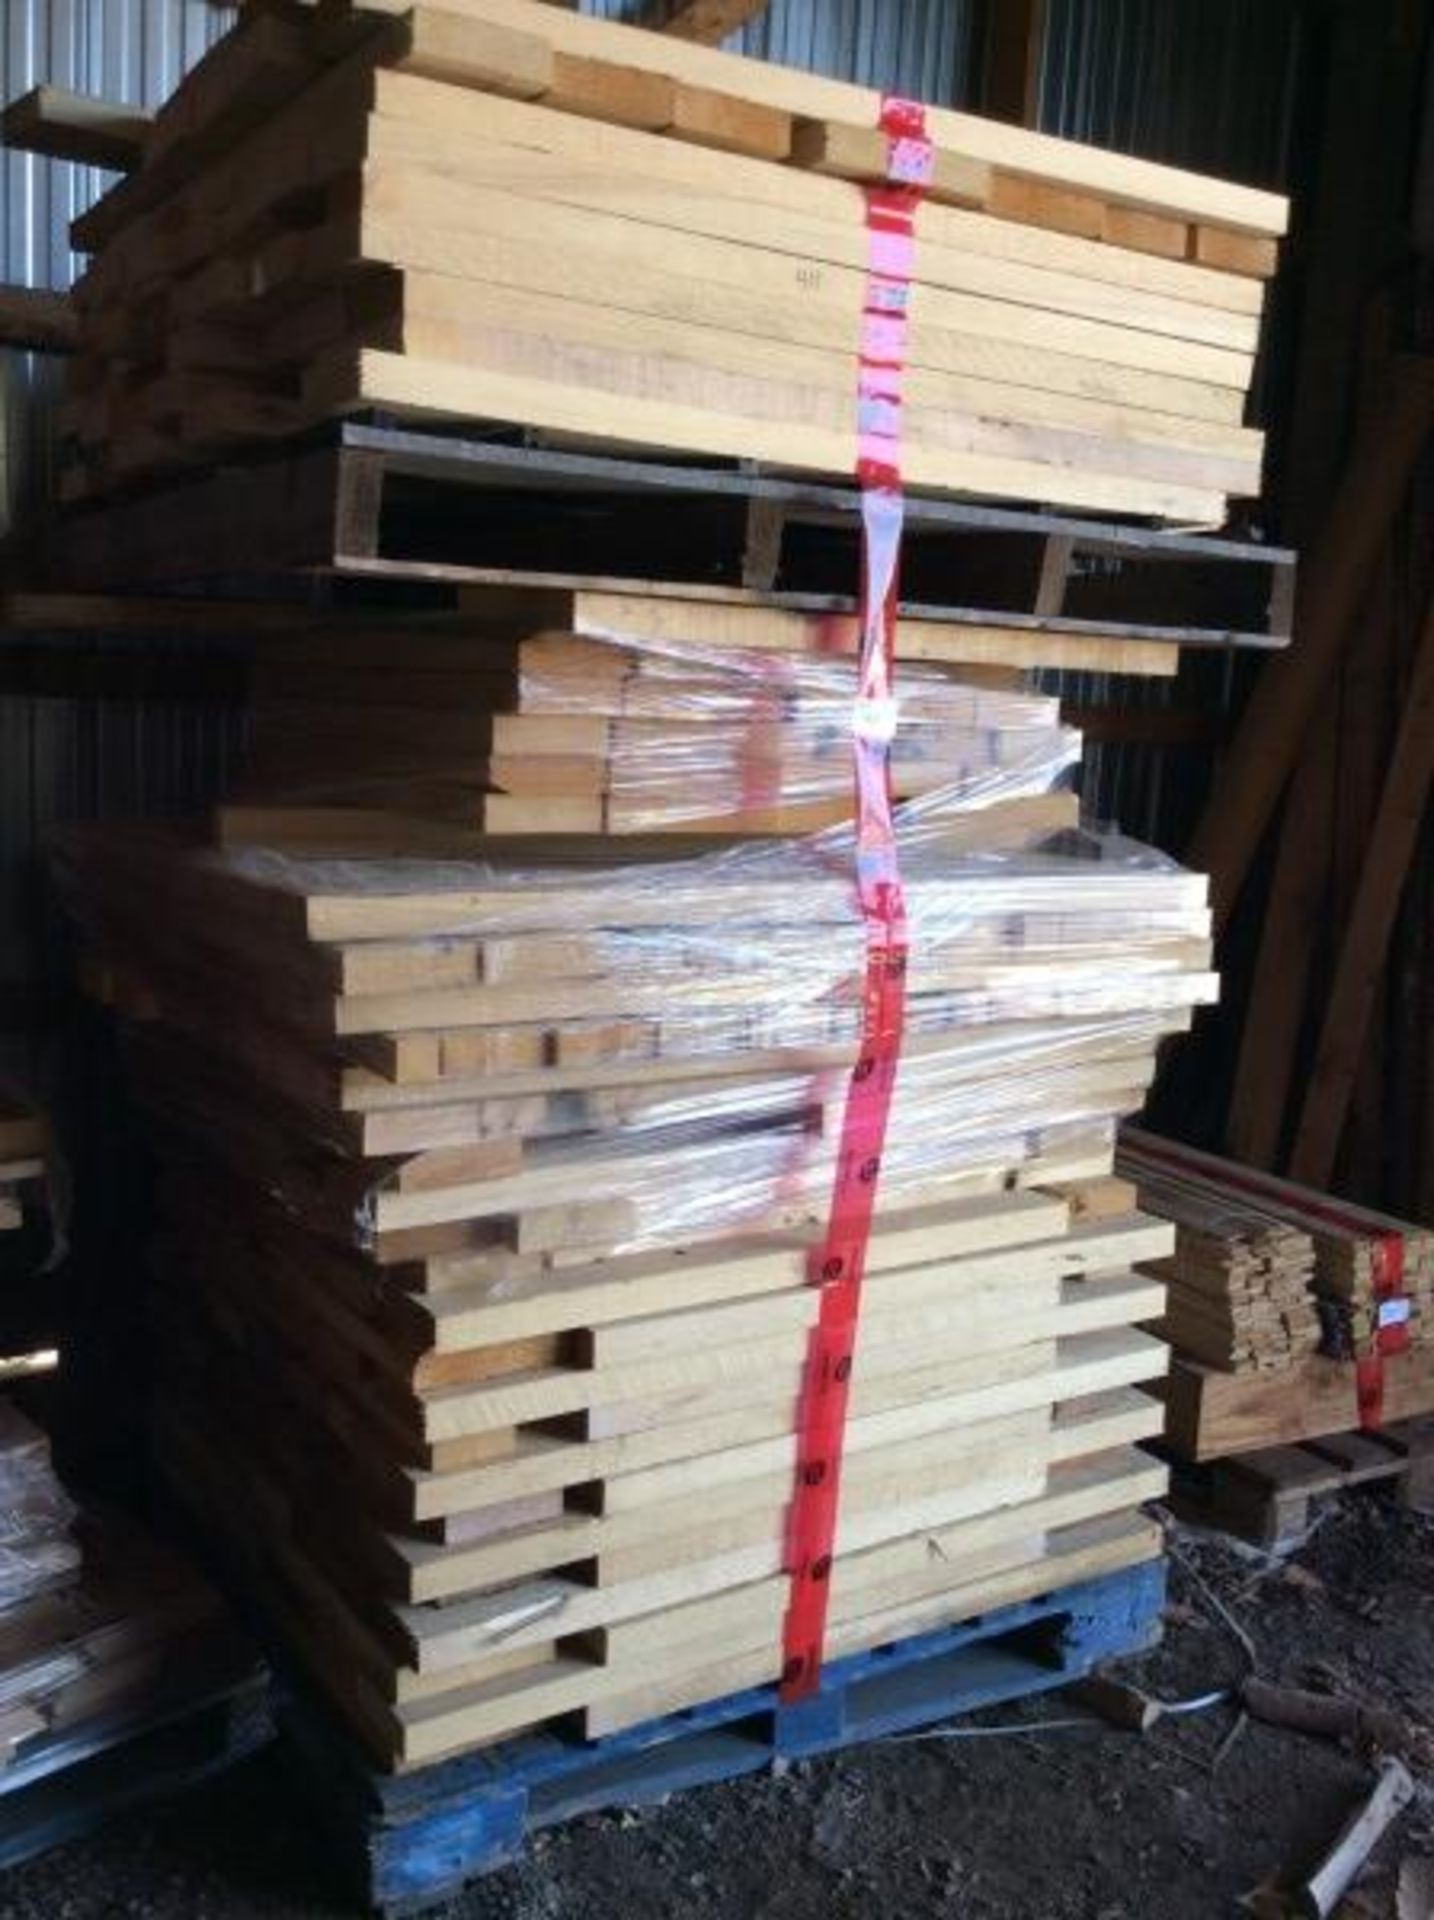 SKID LOT OF 3'-4' MIXED 2" SOFTWOOD - E